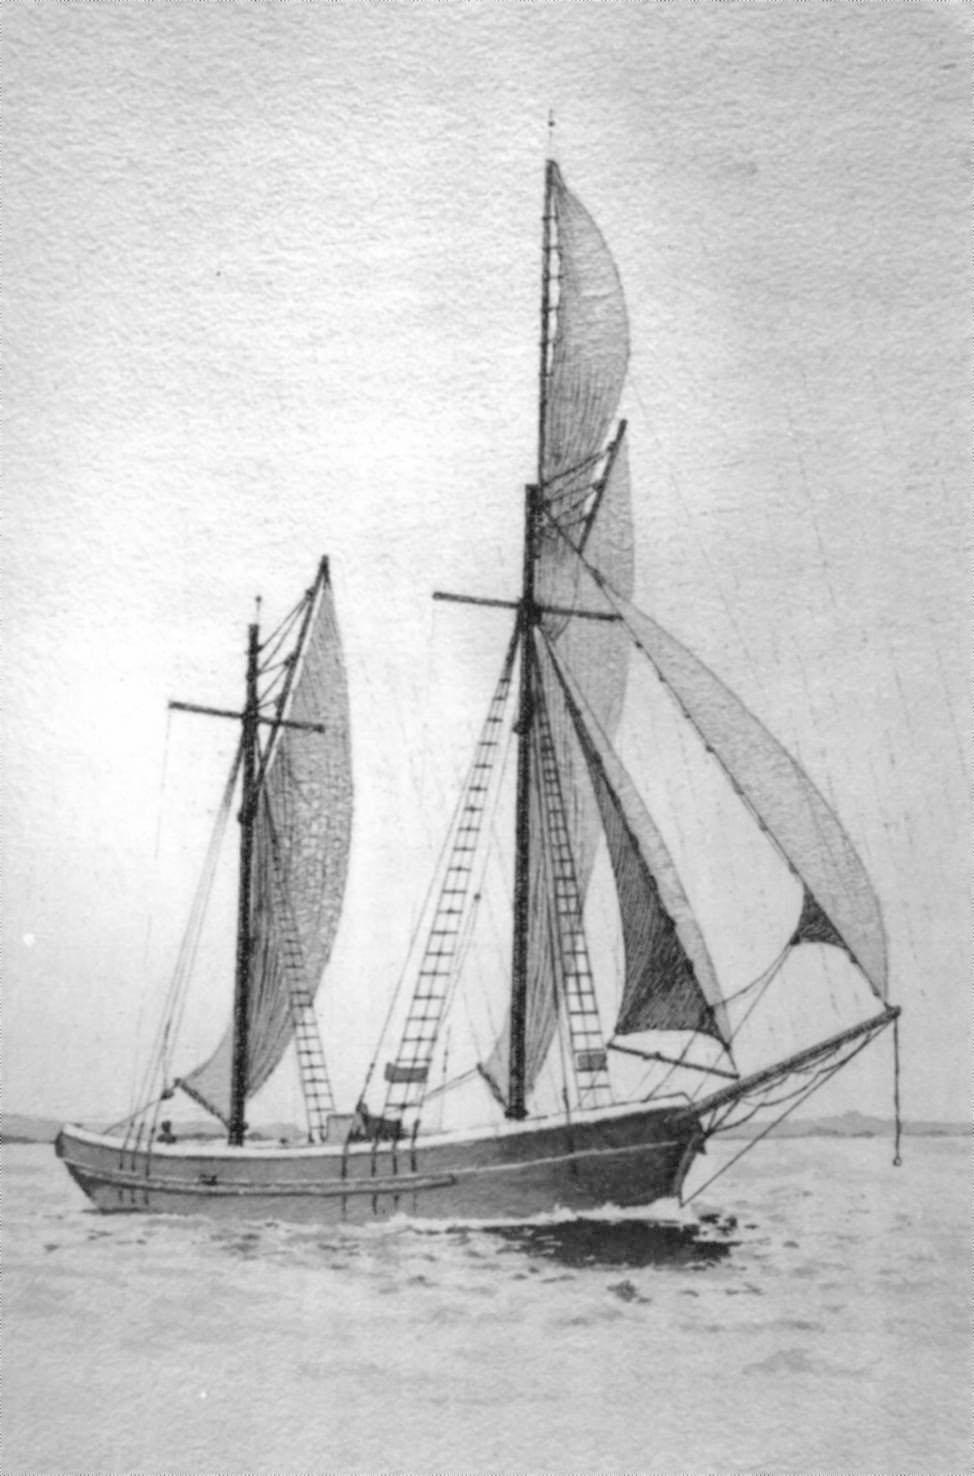 This image shows the vessel in sail.